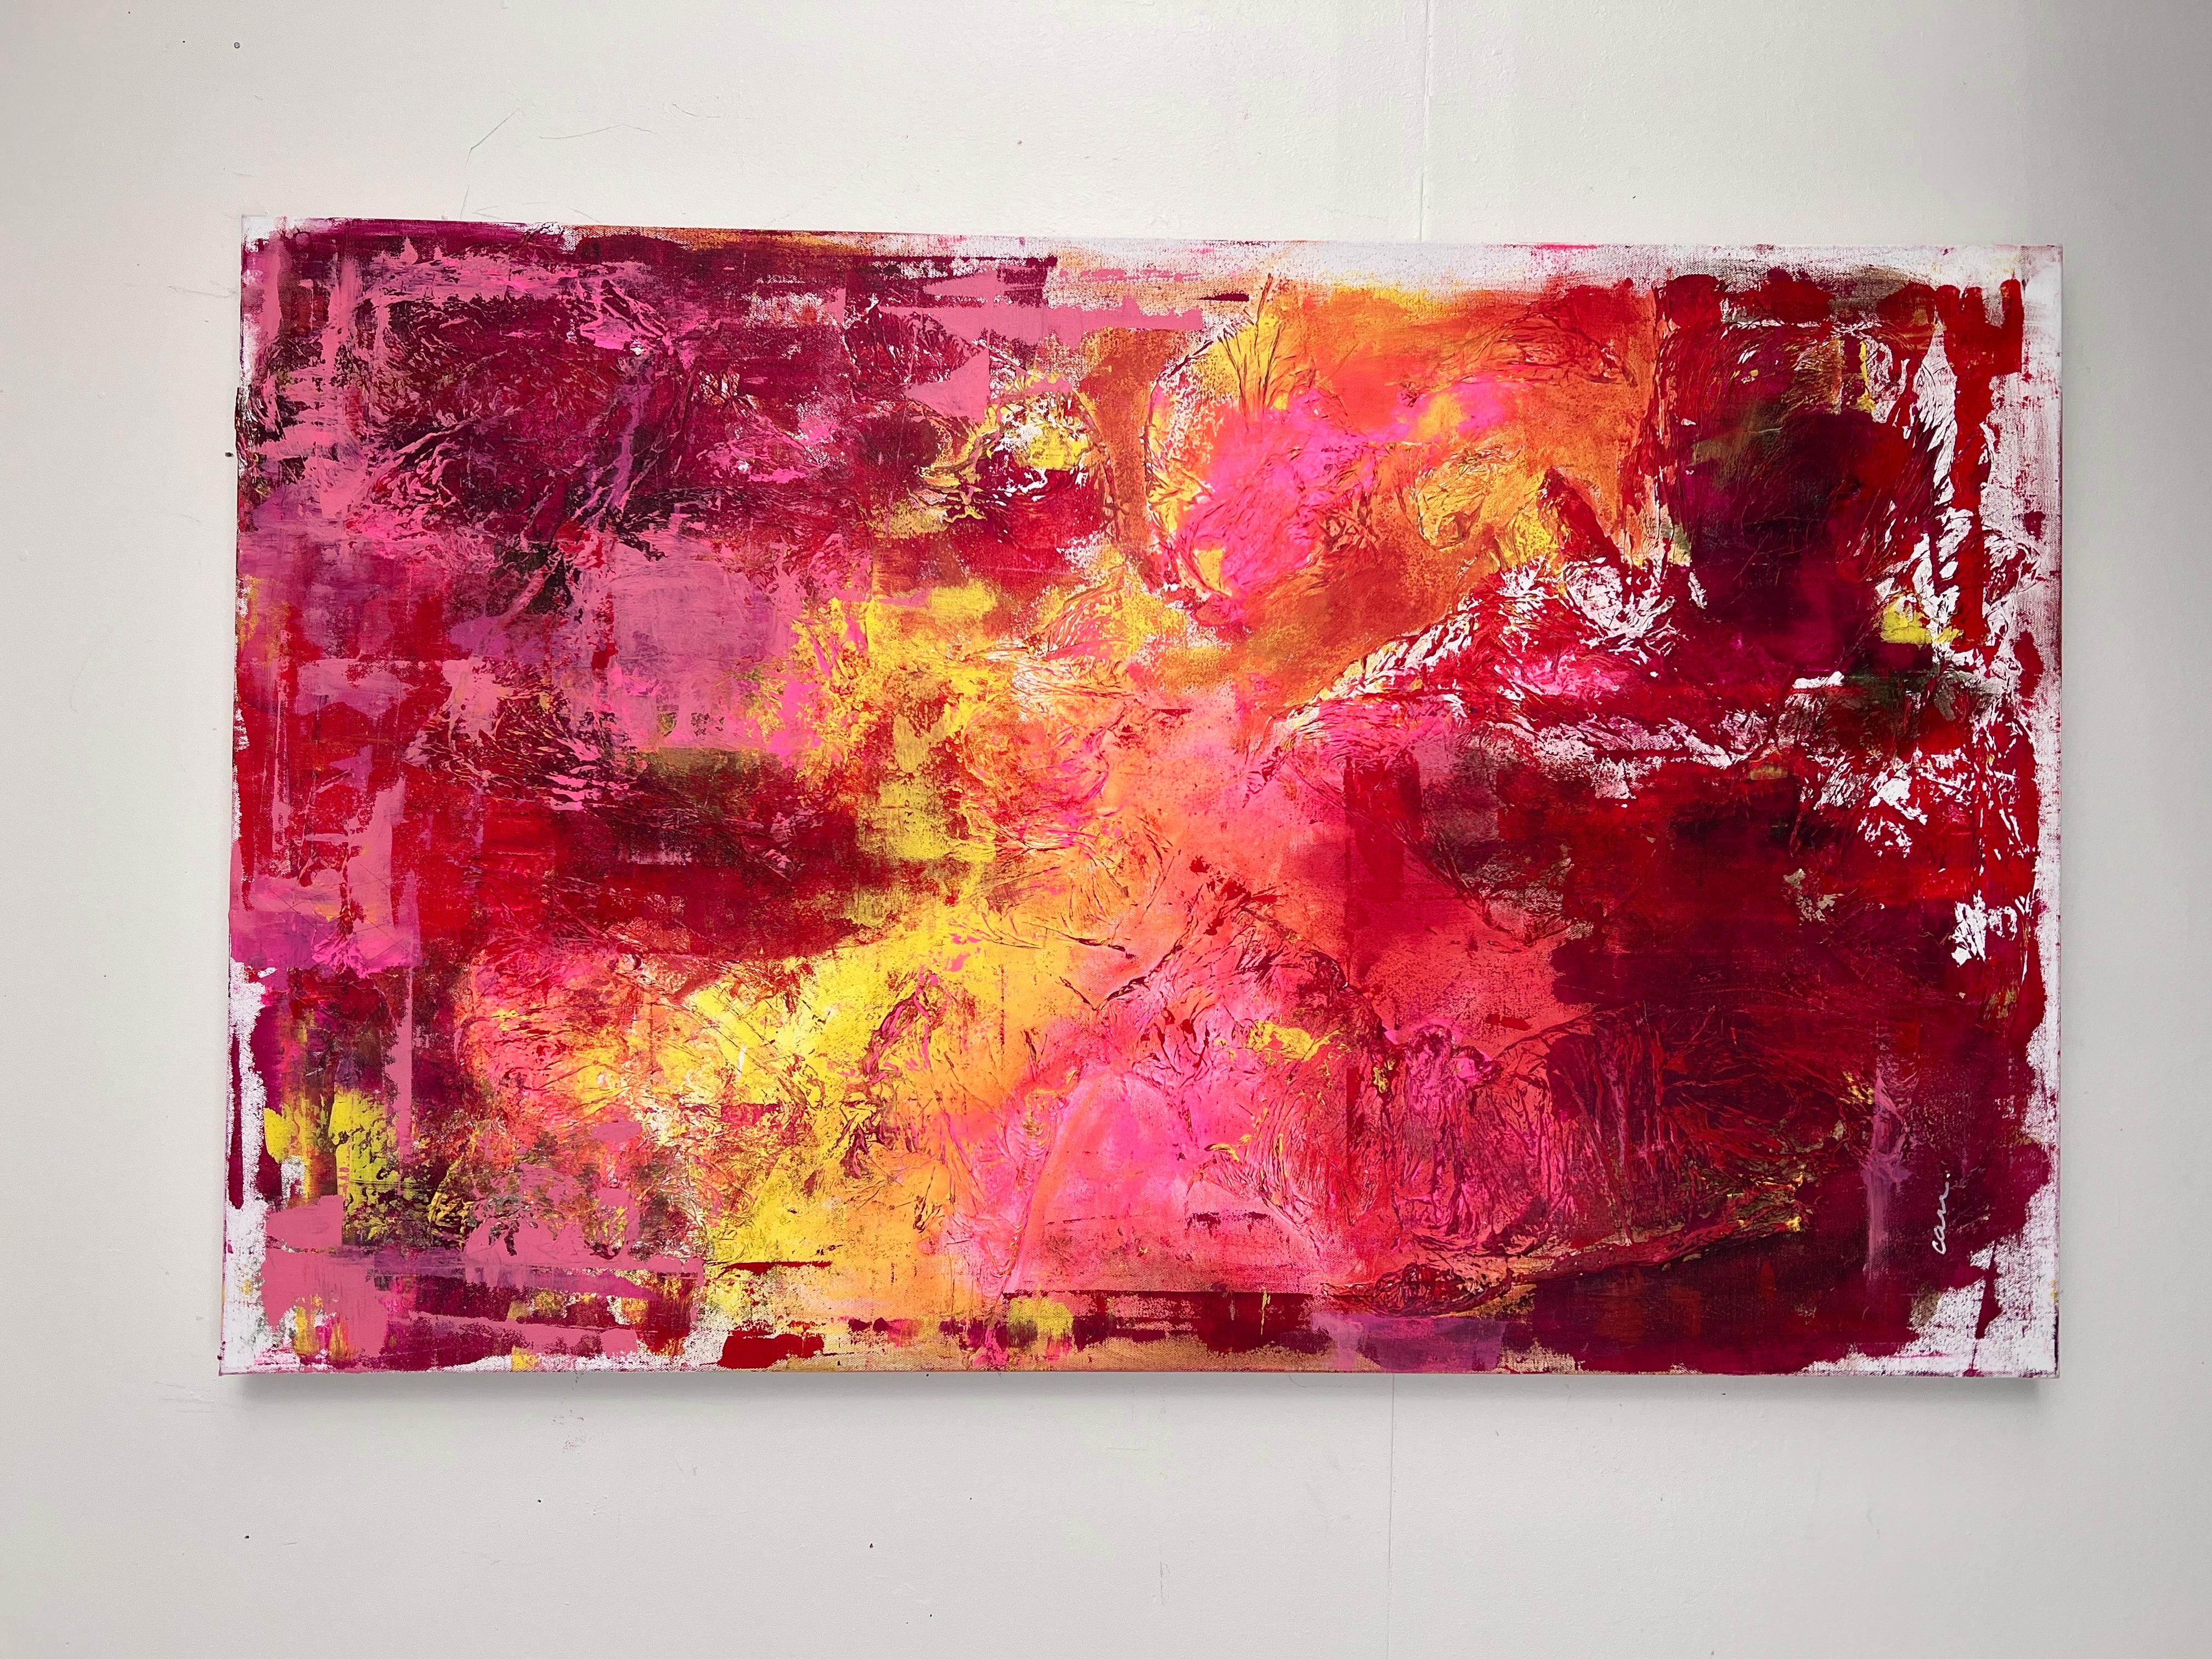 Enamel Large Pink&Red Original Mixed Media Abstract Painting by Artist Arlene Carr For Sale